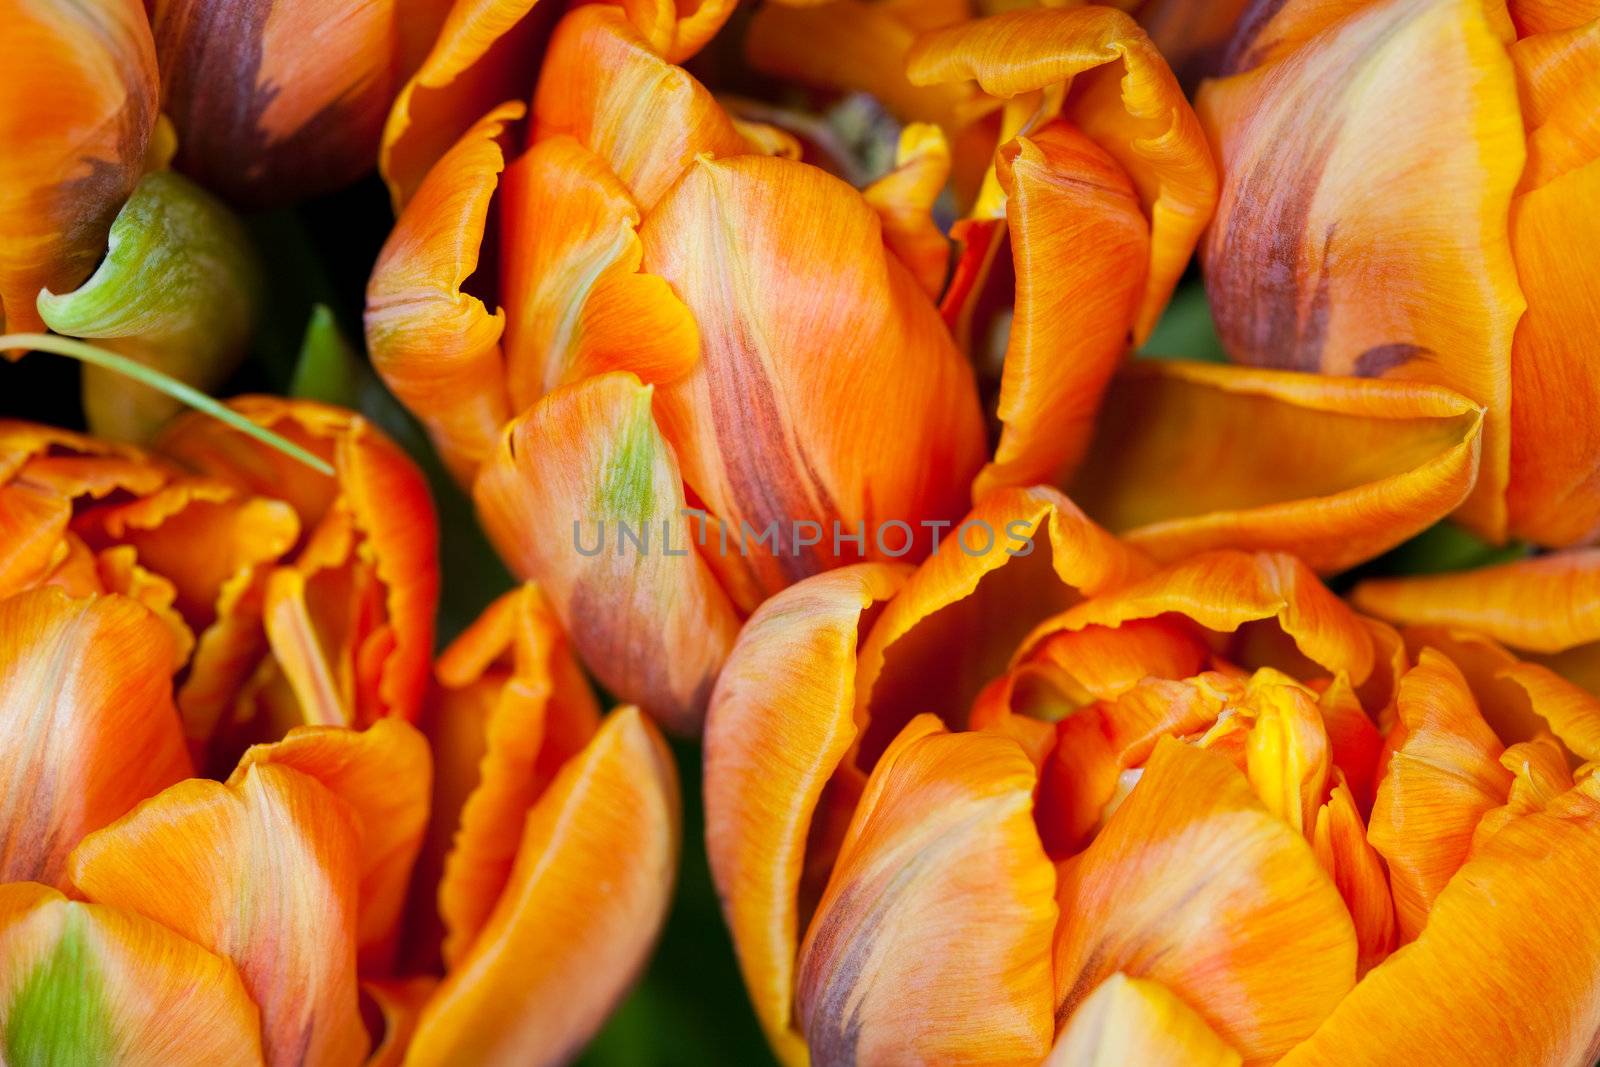 Double flowering tulips by Gravicapa